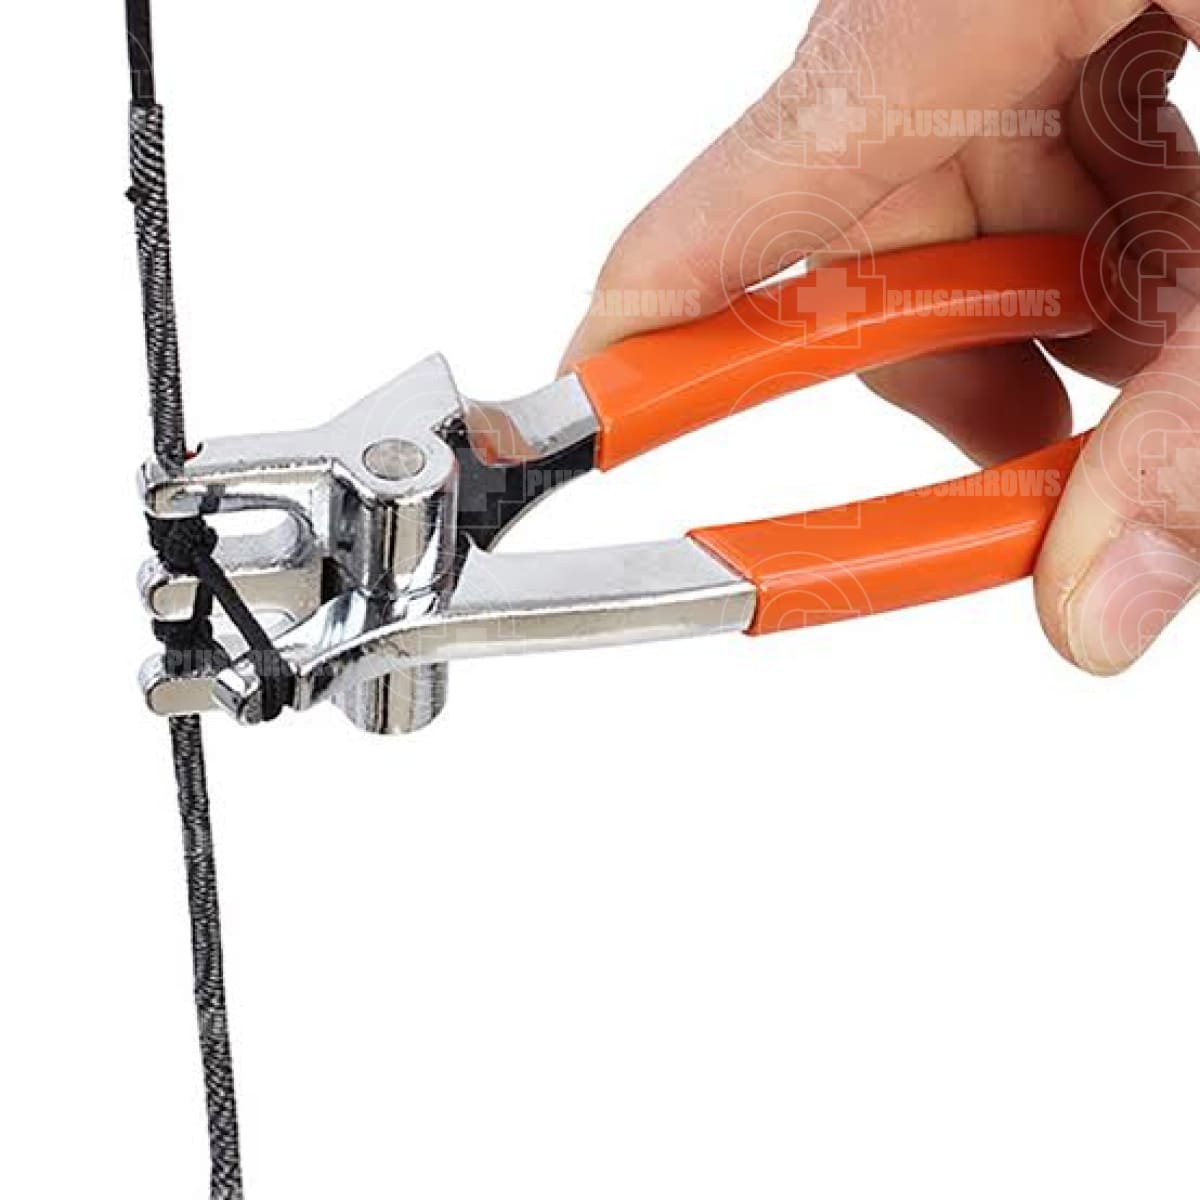 Archery D Loop Pliers D Rope String Nonslip Grip Compound Bow Tool Orange